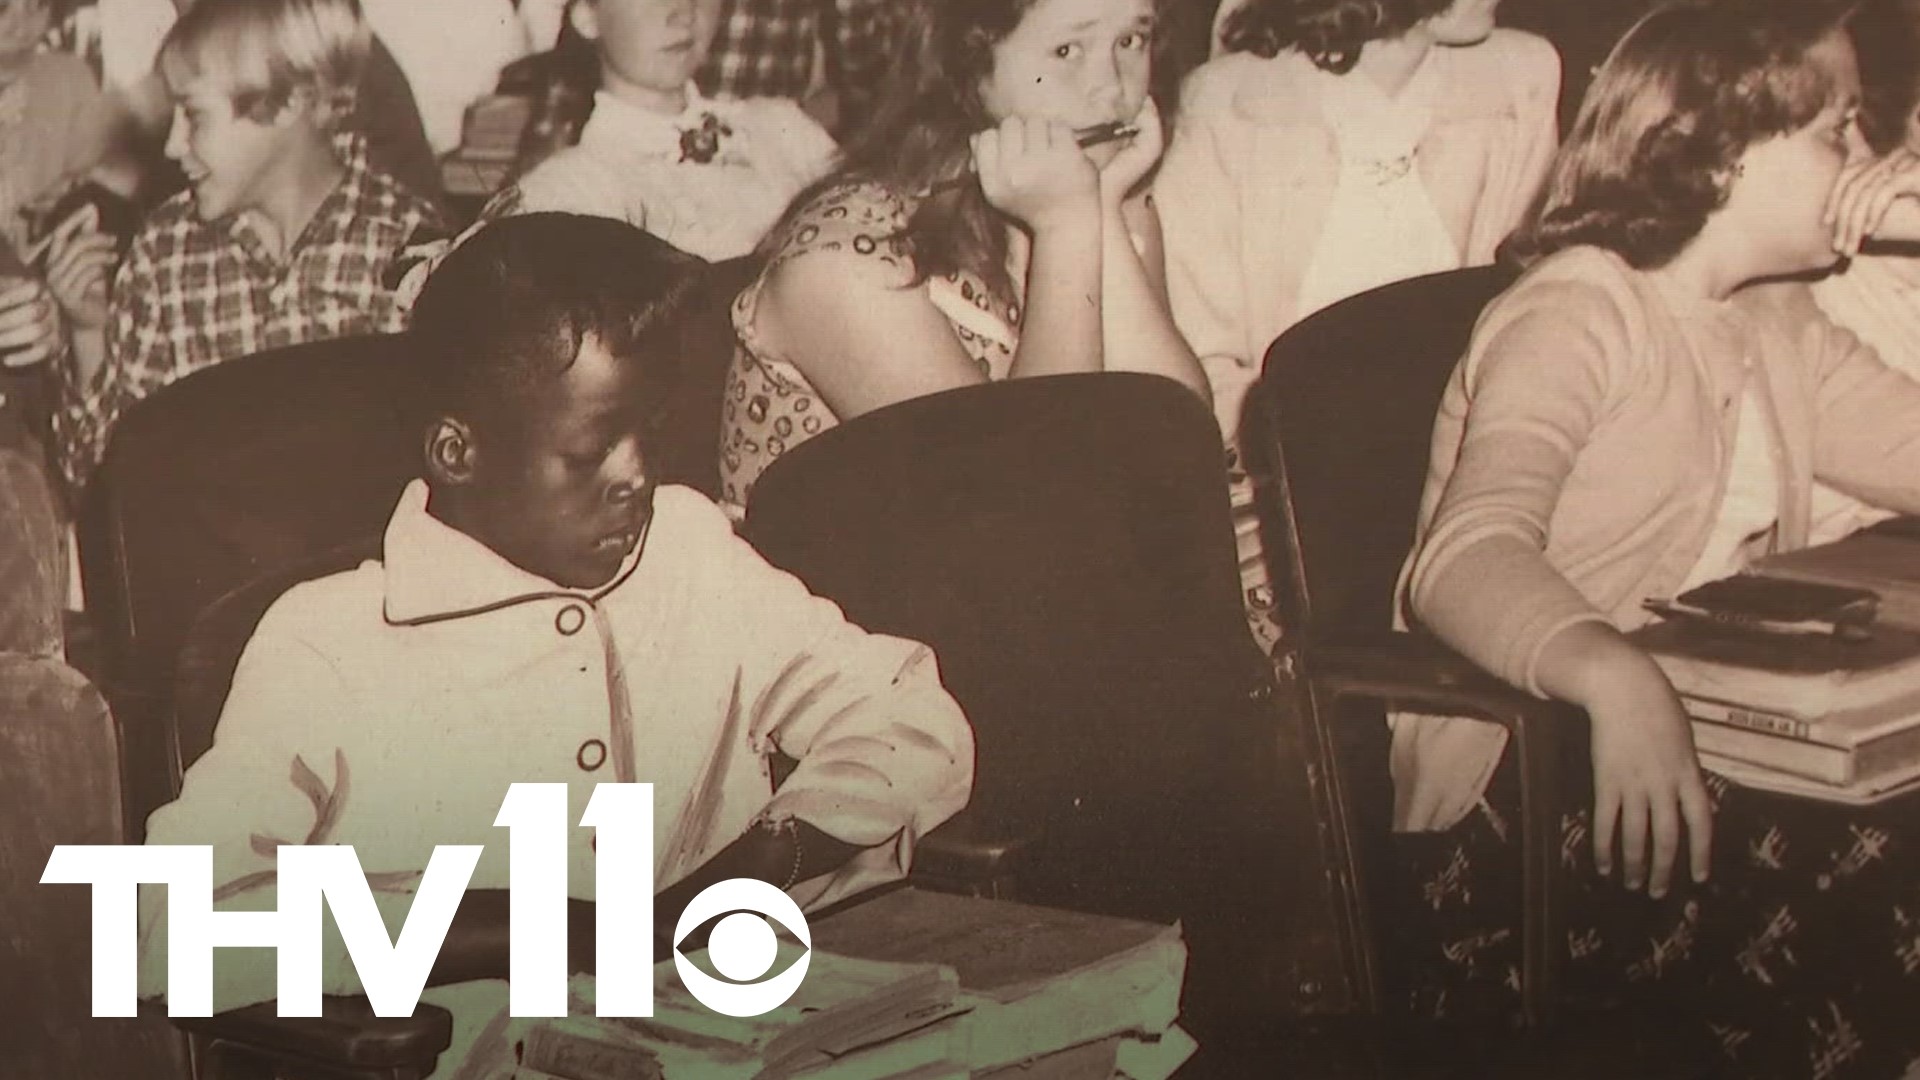 A new effort is underway to protect the teaching of African-American history in Arkansas schools.